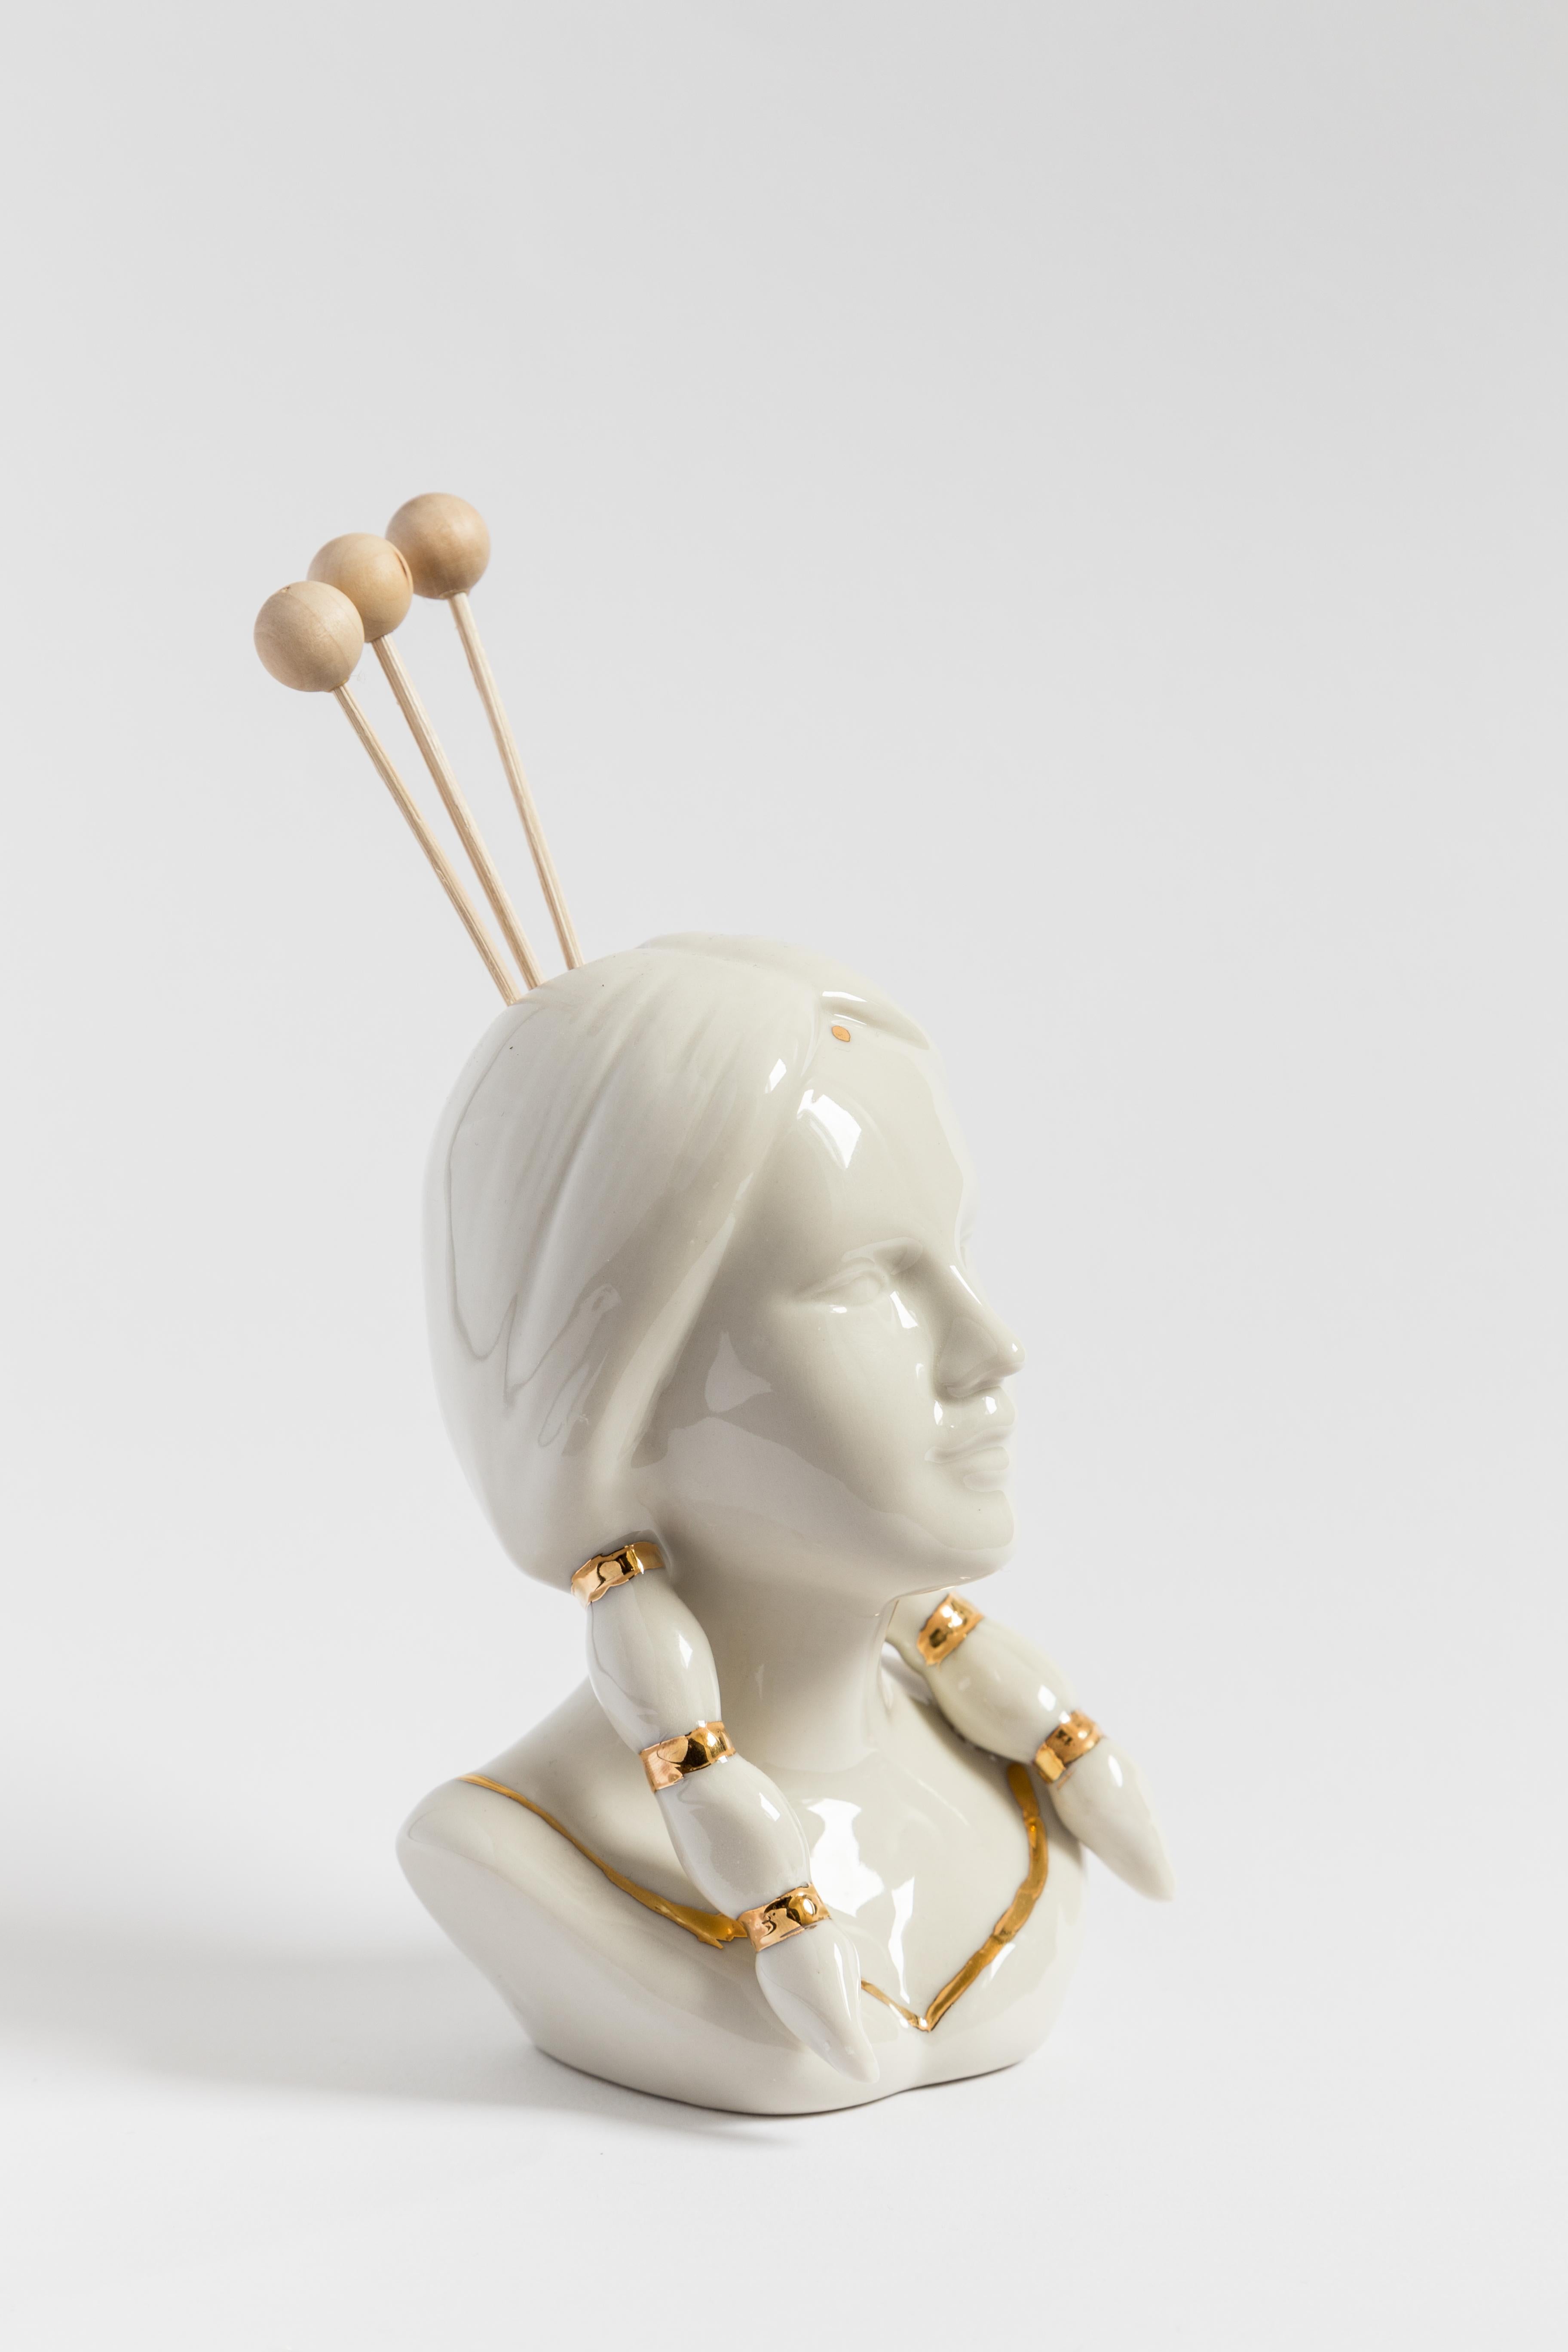 This Italian porcelain sculpture is part of Grand Tour by Vito Nesta. Made in Capodimonte porcelain with a glossy finish and gold detail, this sculpture is an essential oil diffuser and is shaped like a Native American woman.